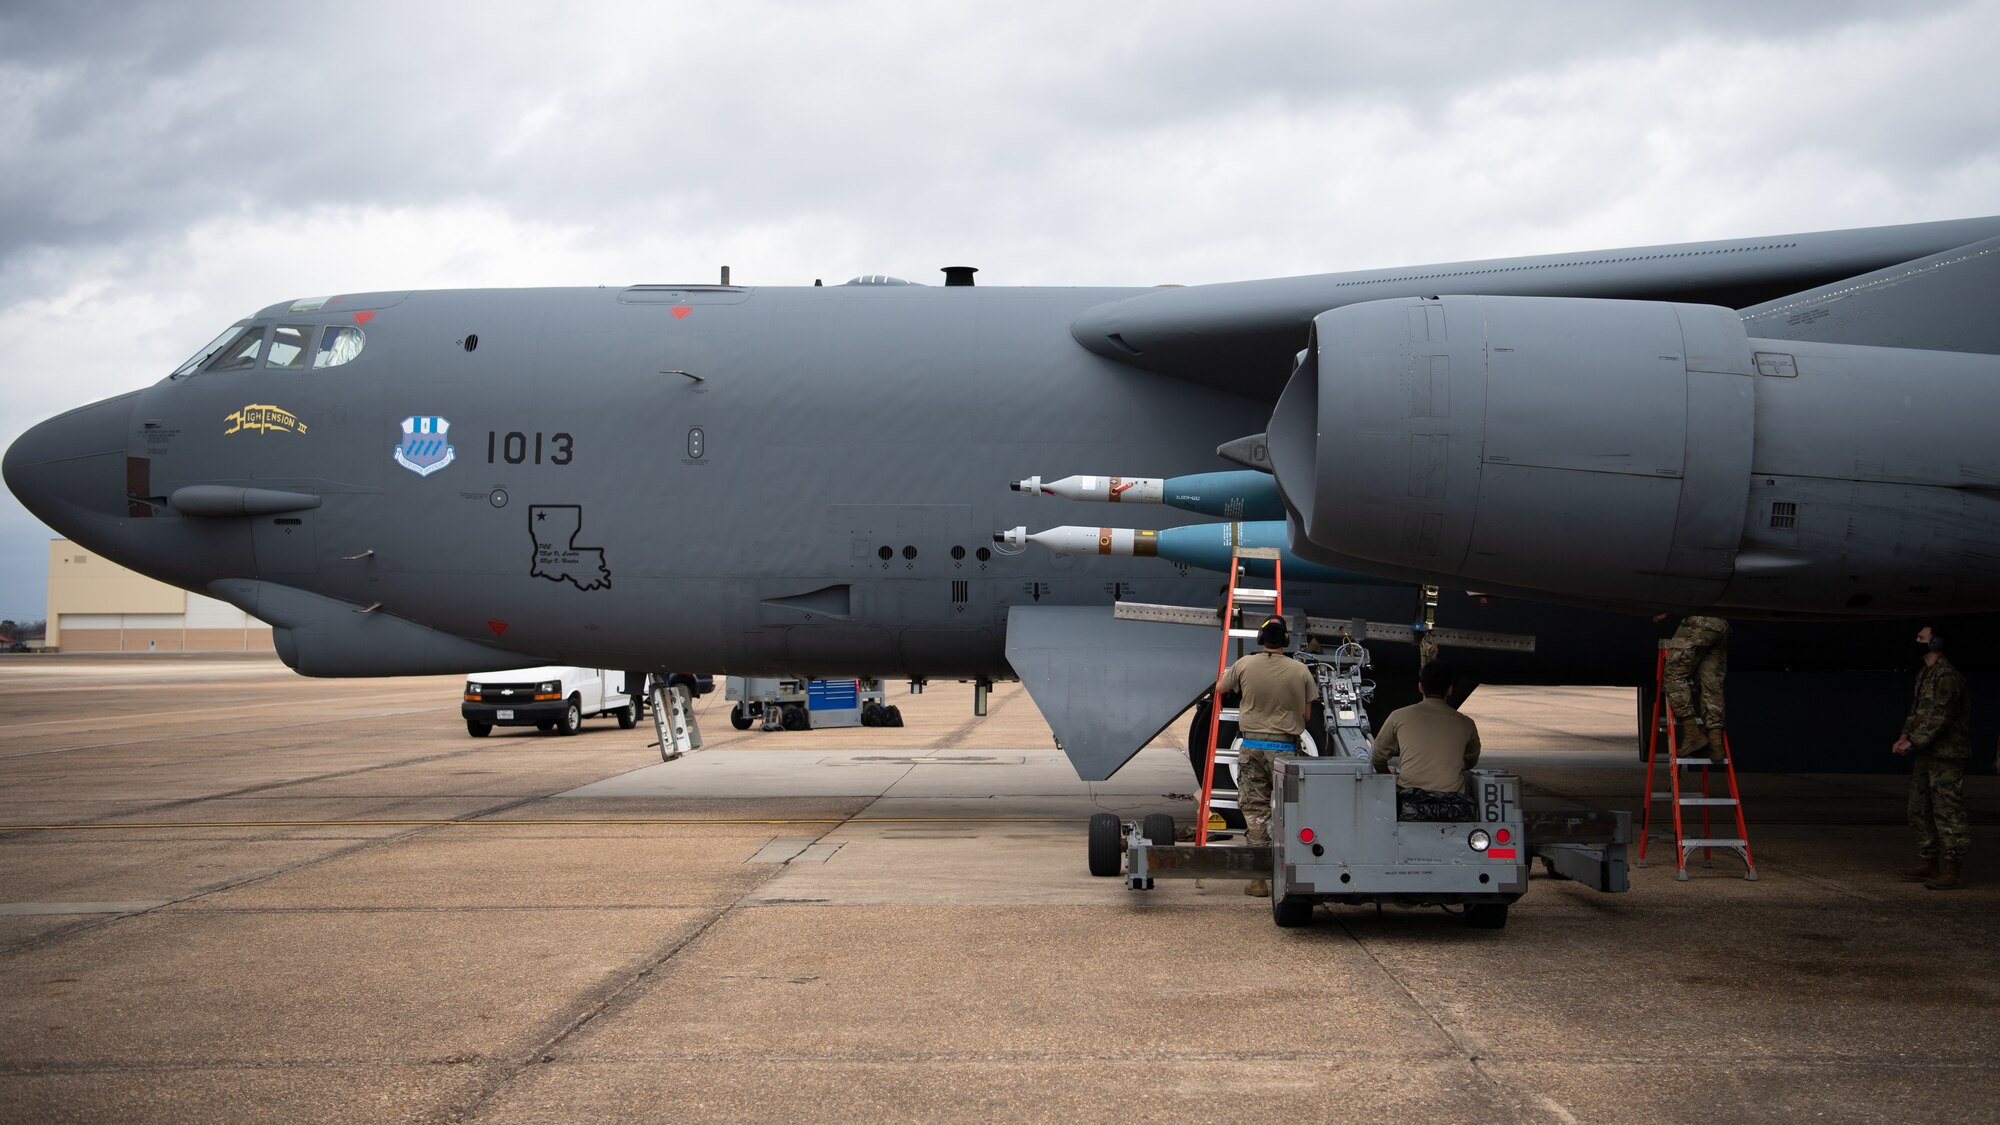 A weapons load crew from the 2nd Aircraft Maintenance Squadron transport a GBU-10 munition to be loaded onto a B-52H Stratofortress during Combat Hammer at Barksdale Air Force Base, La., March 10, 2021. Airmen from the 2nd Bomb Wing loaded and employed nearly 50 types of various munitions and flew a total of eight sorties in support of exercise Combat Hammer. (U.S. Air Force photo by Airman 1st Class Jacob B. Wrightsman)